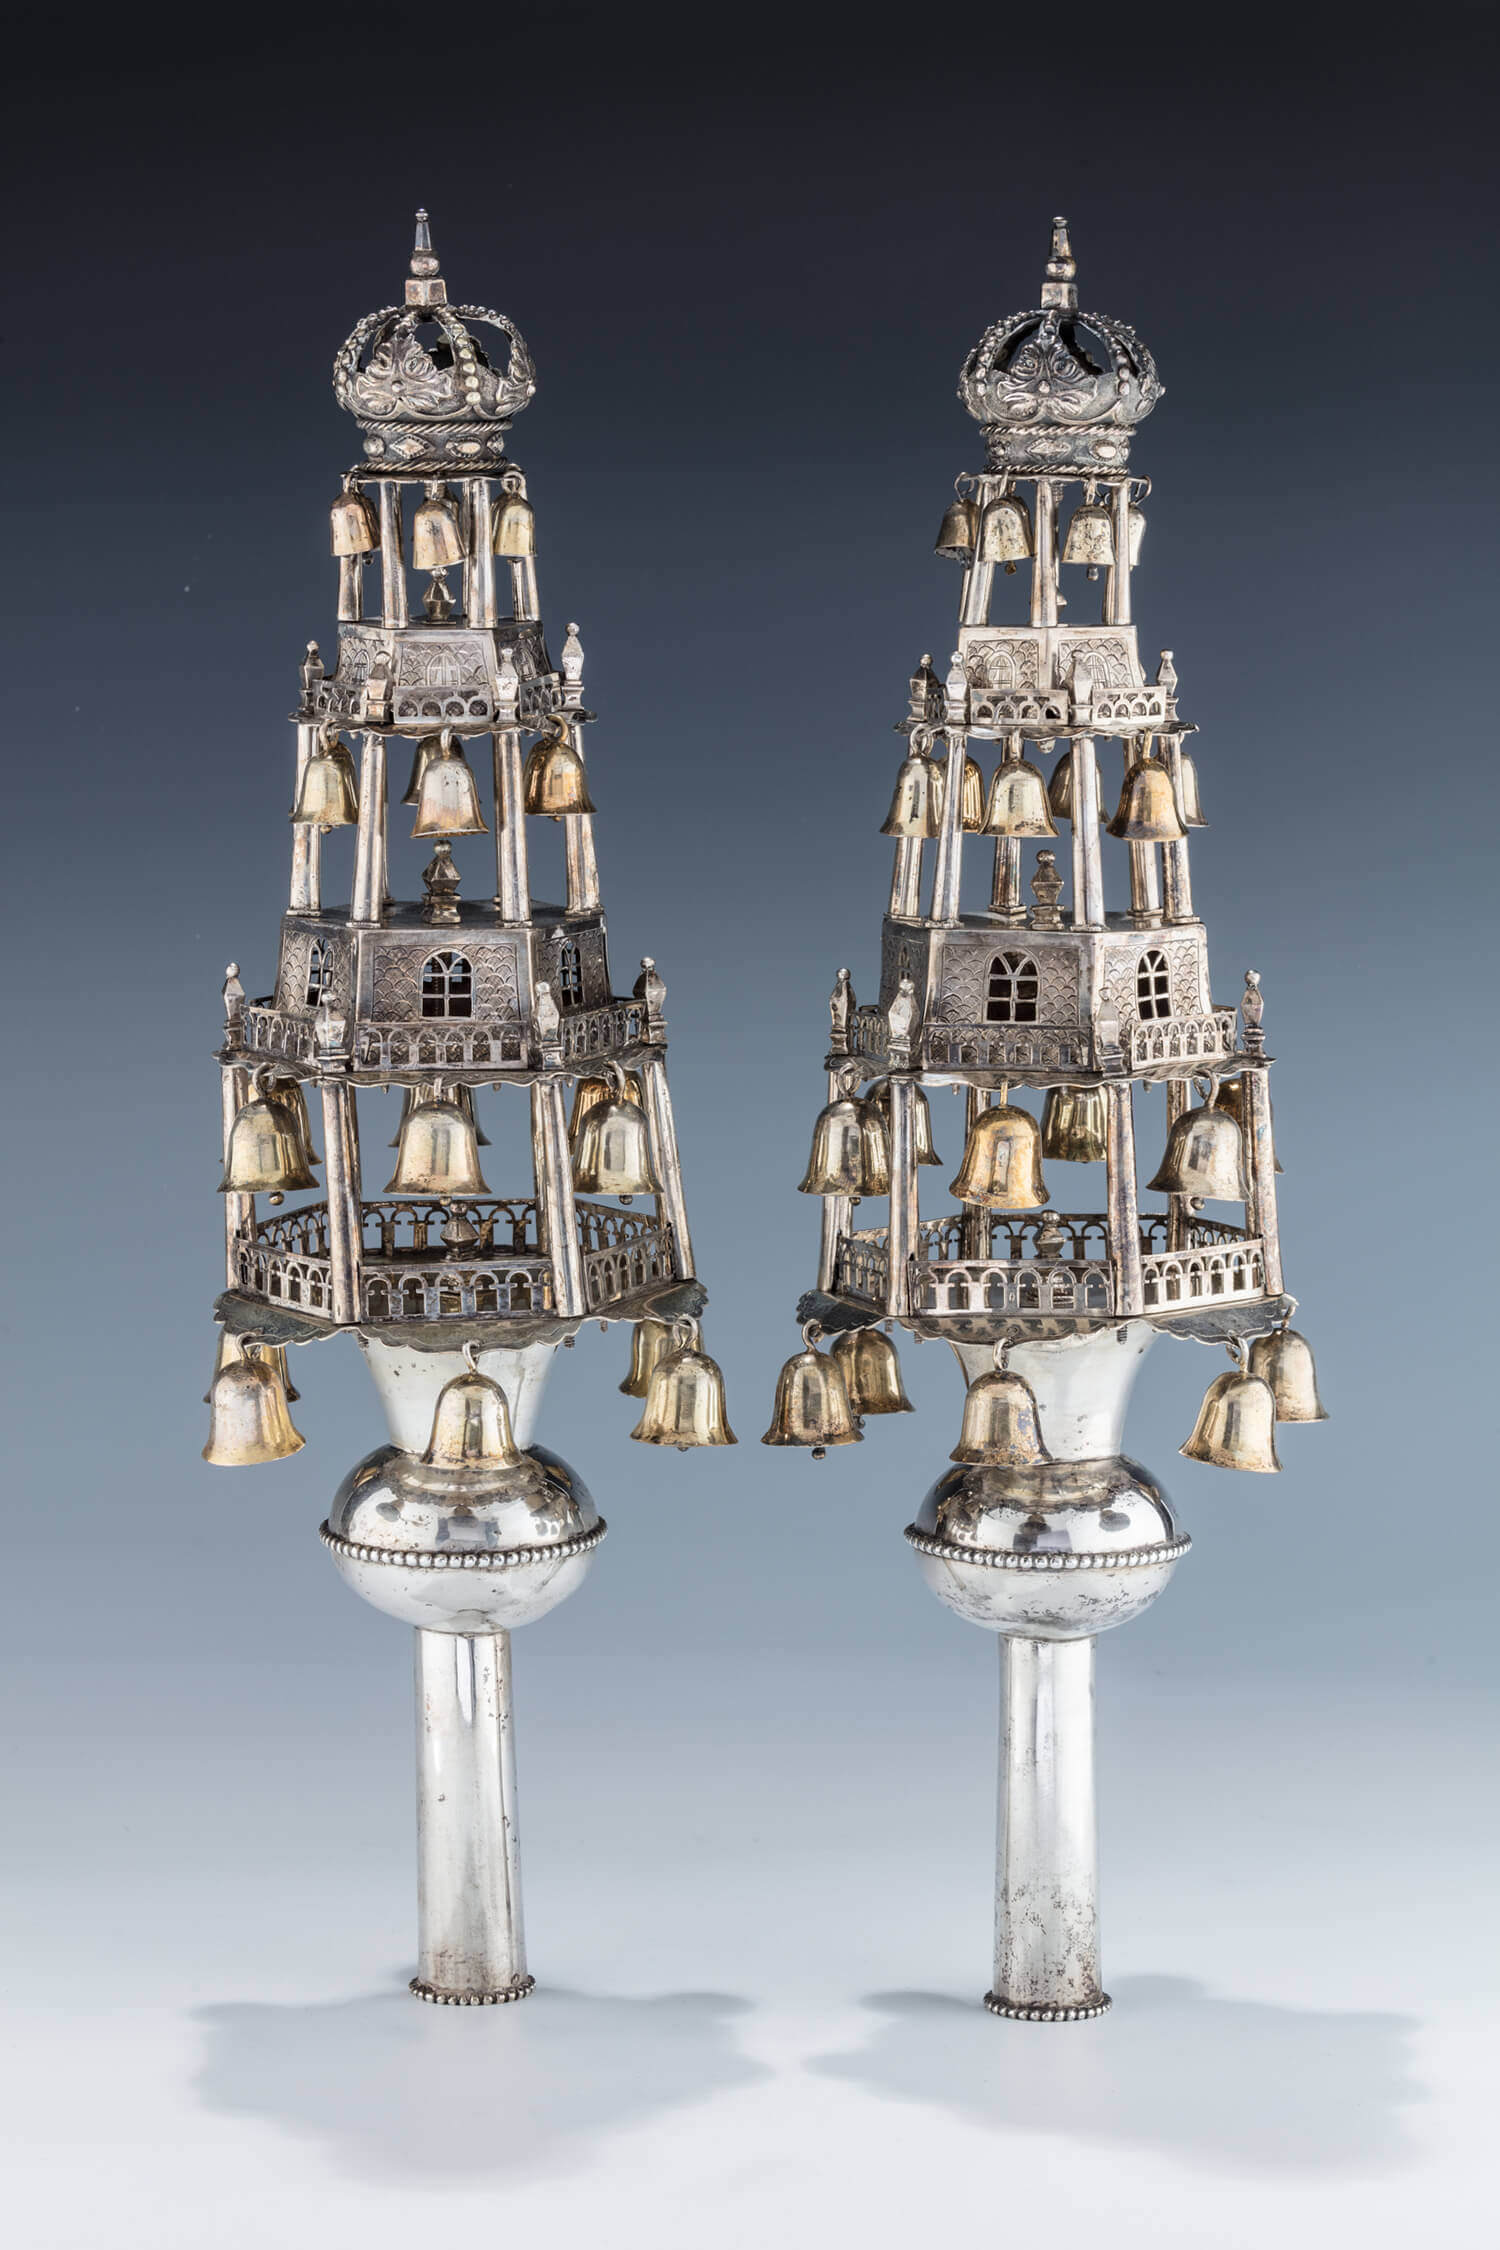 108. A RARE AND IMPORTANT PAIR OF SILVER TORAH FINIALS